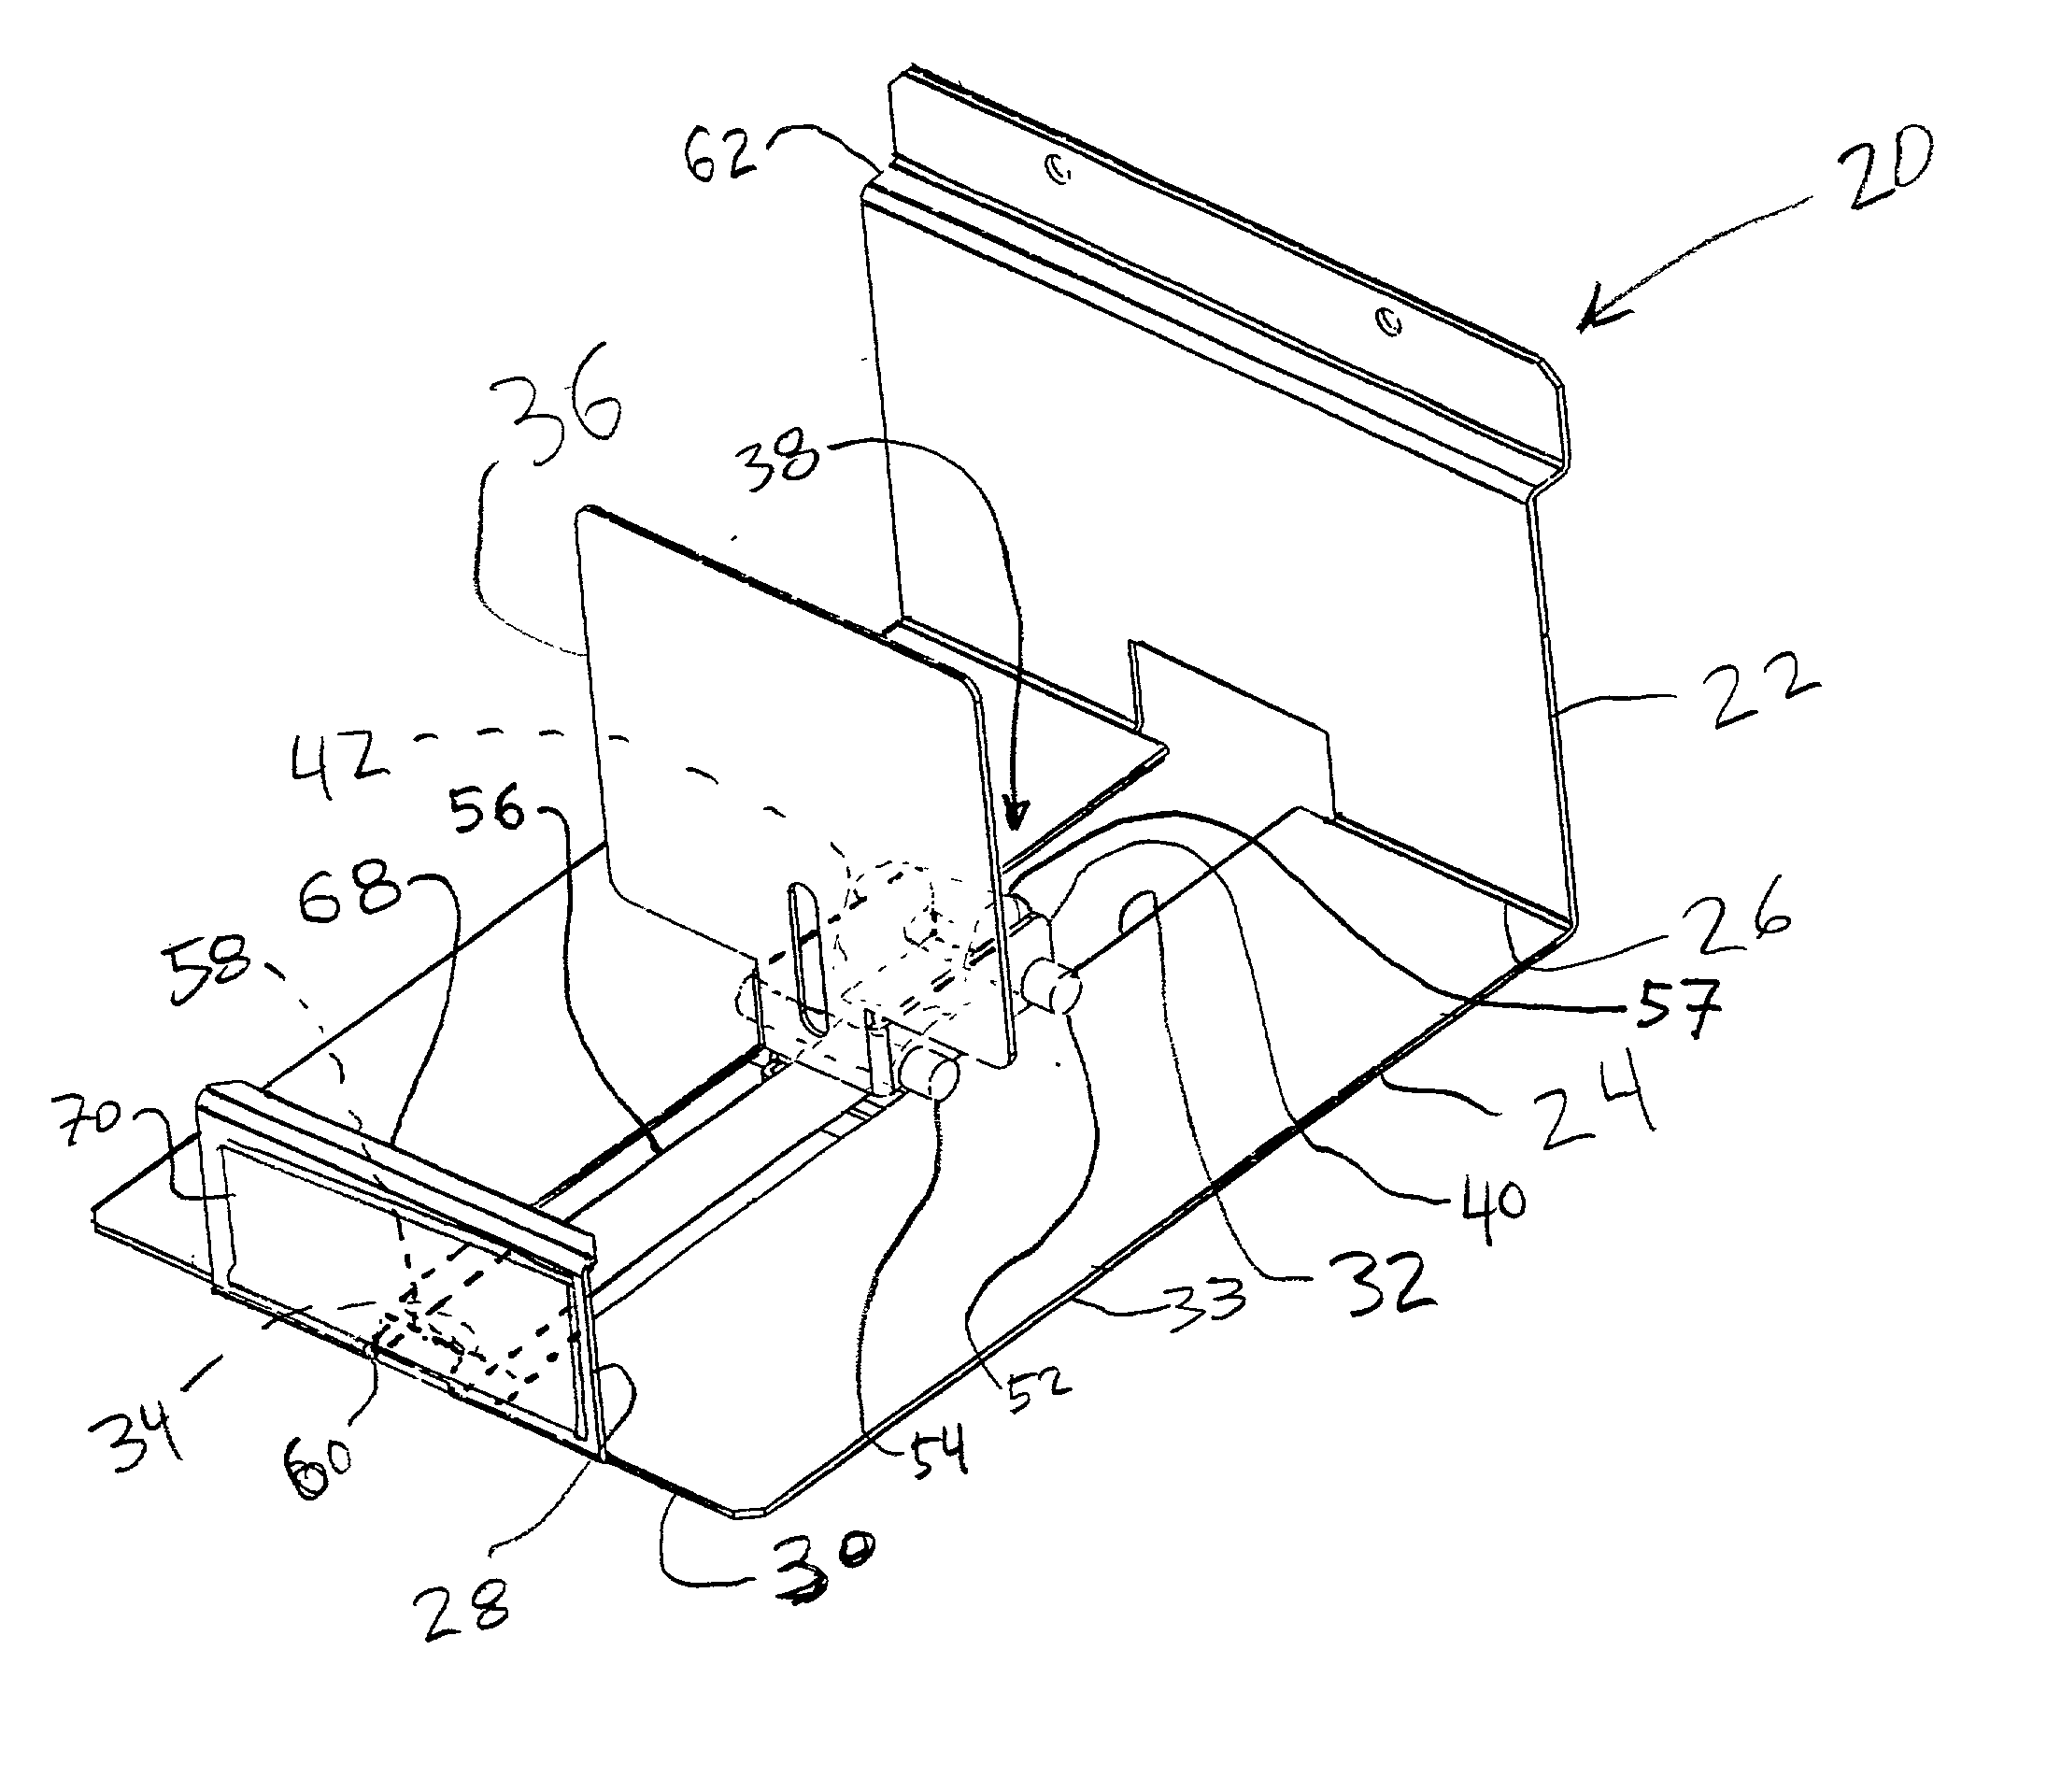 Merchandise display tray with spring-loaded pusher plate